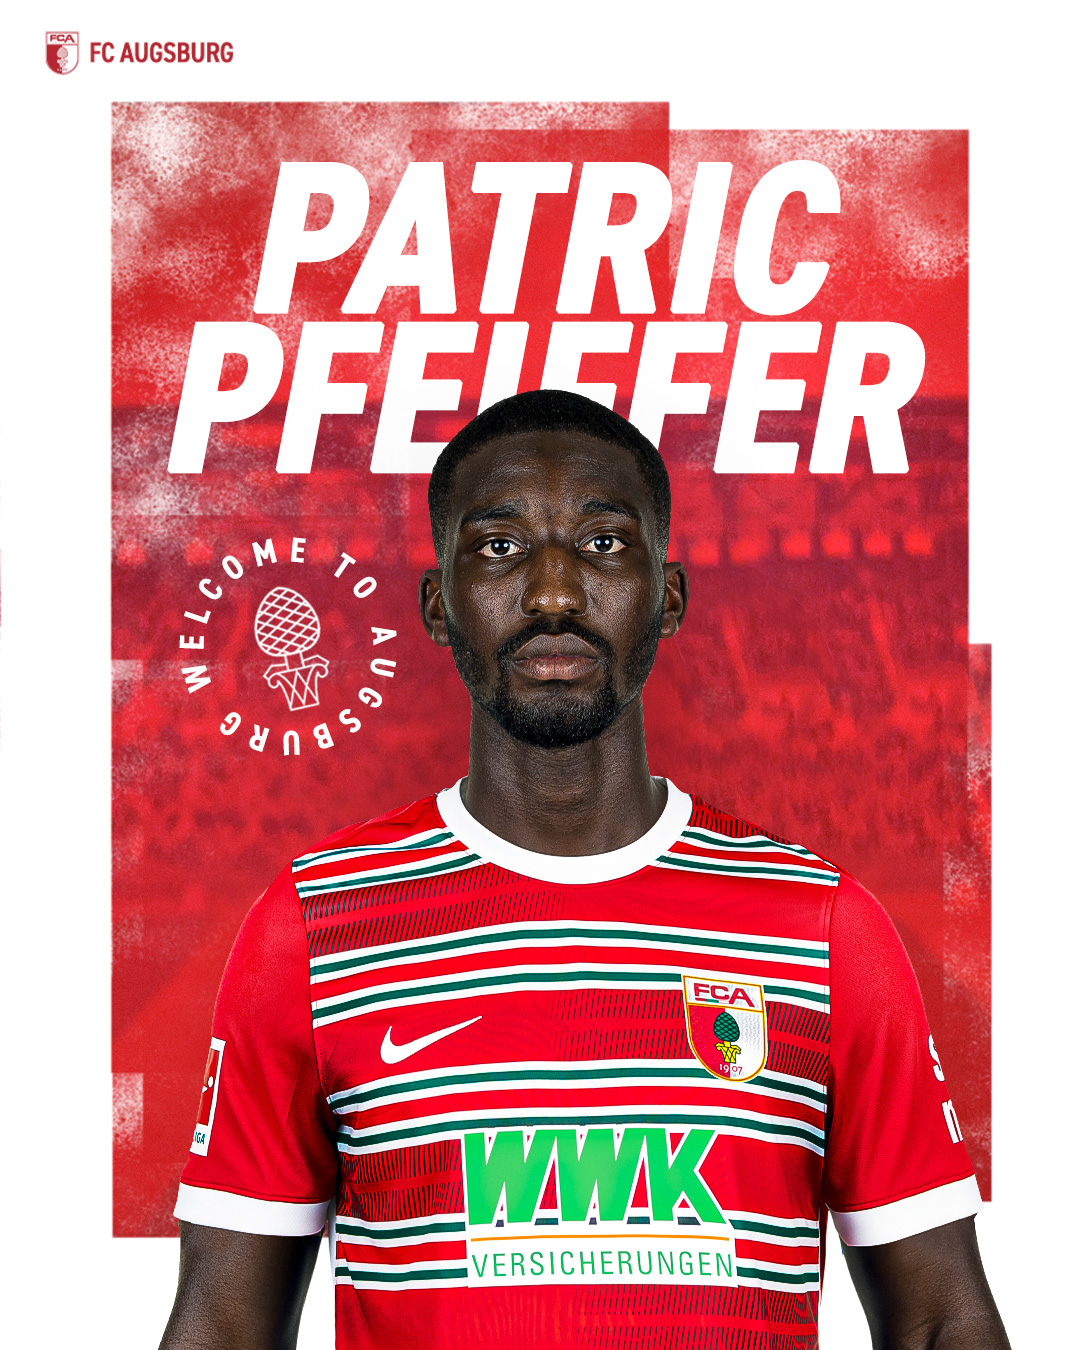 Augsburg is the ideal place to continue my Bundesliga journey- Patric Pfeiffer states after joining club